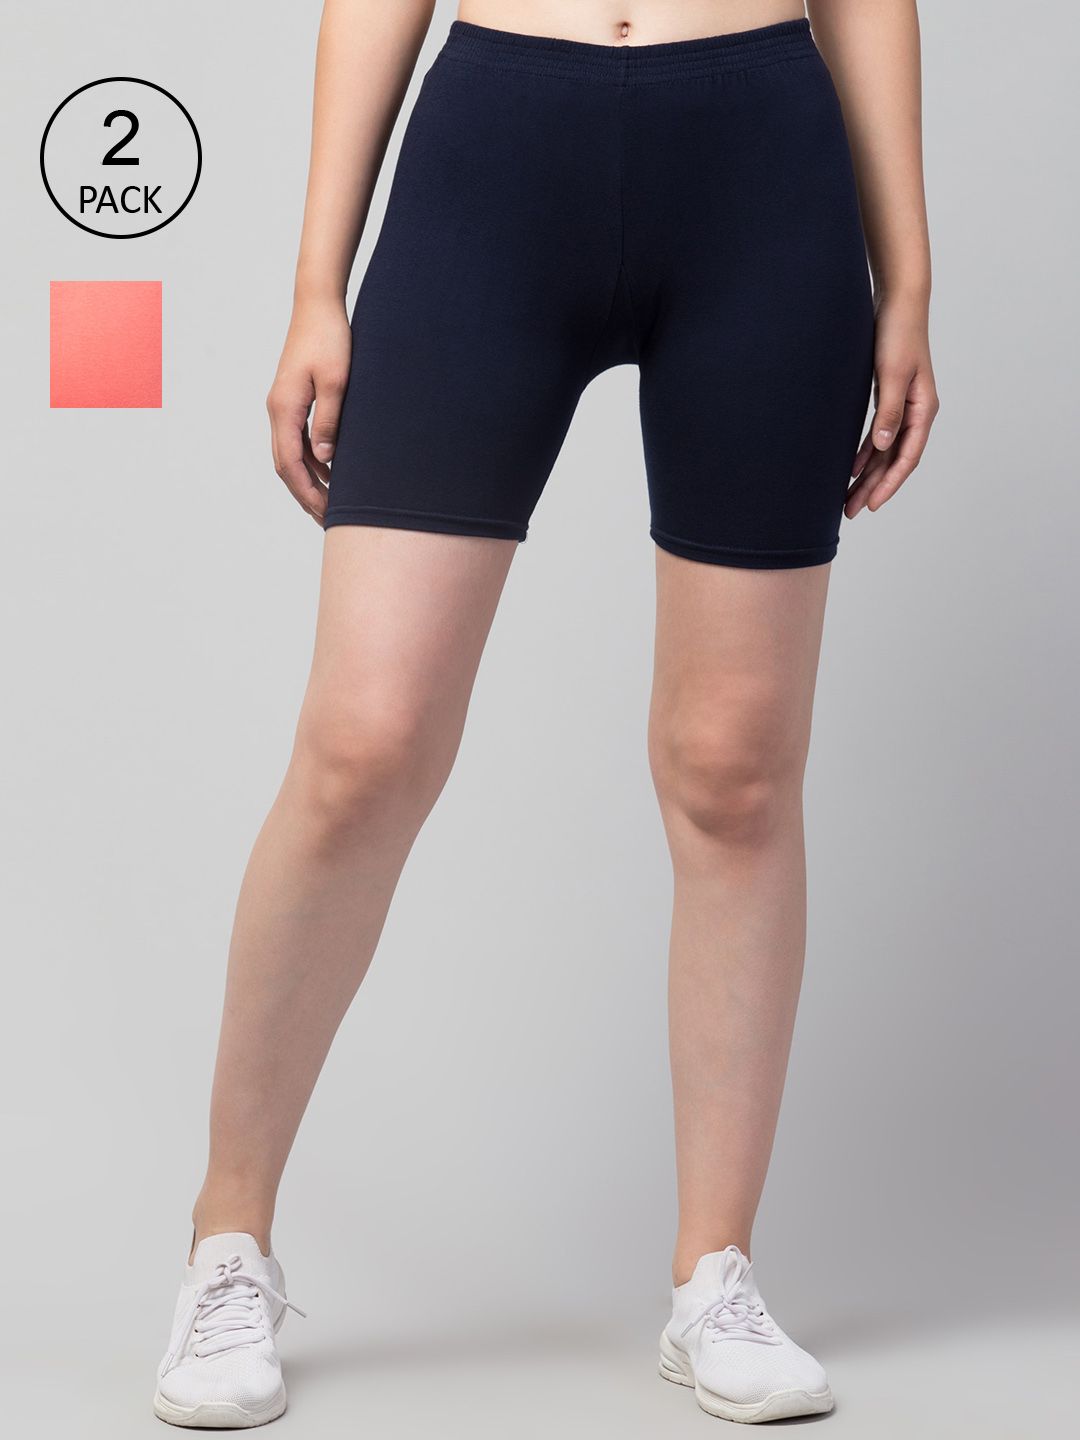 Apraa & Parma Women Navy Blue Cotton Pack of 2 Slim Fit Cycling Sports Shorts Price in India